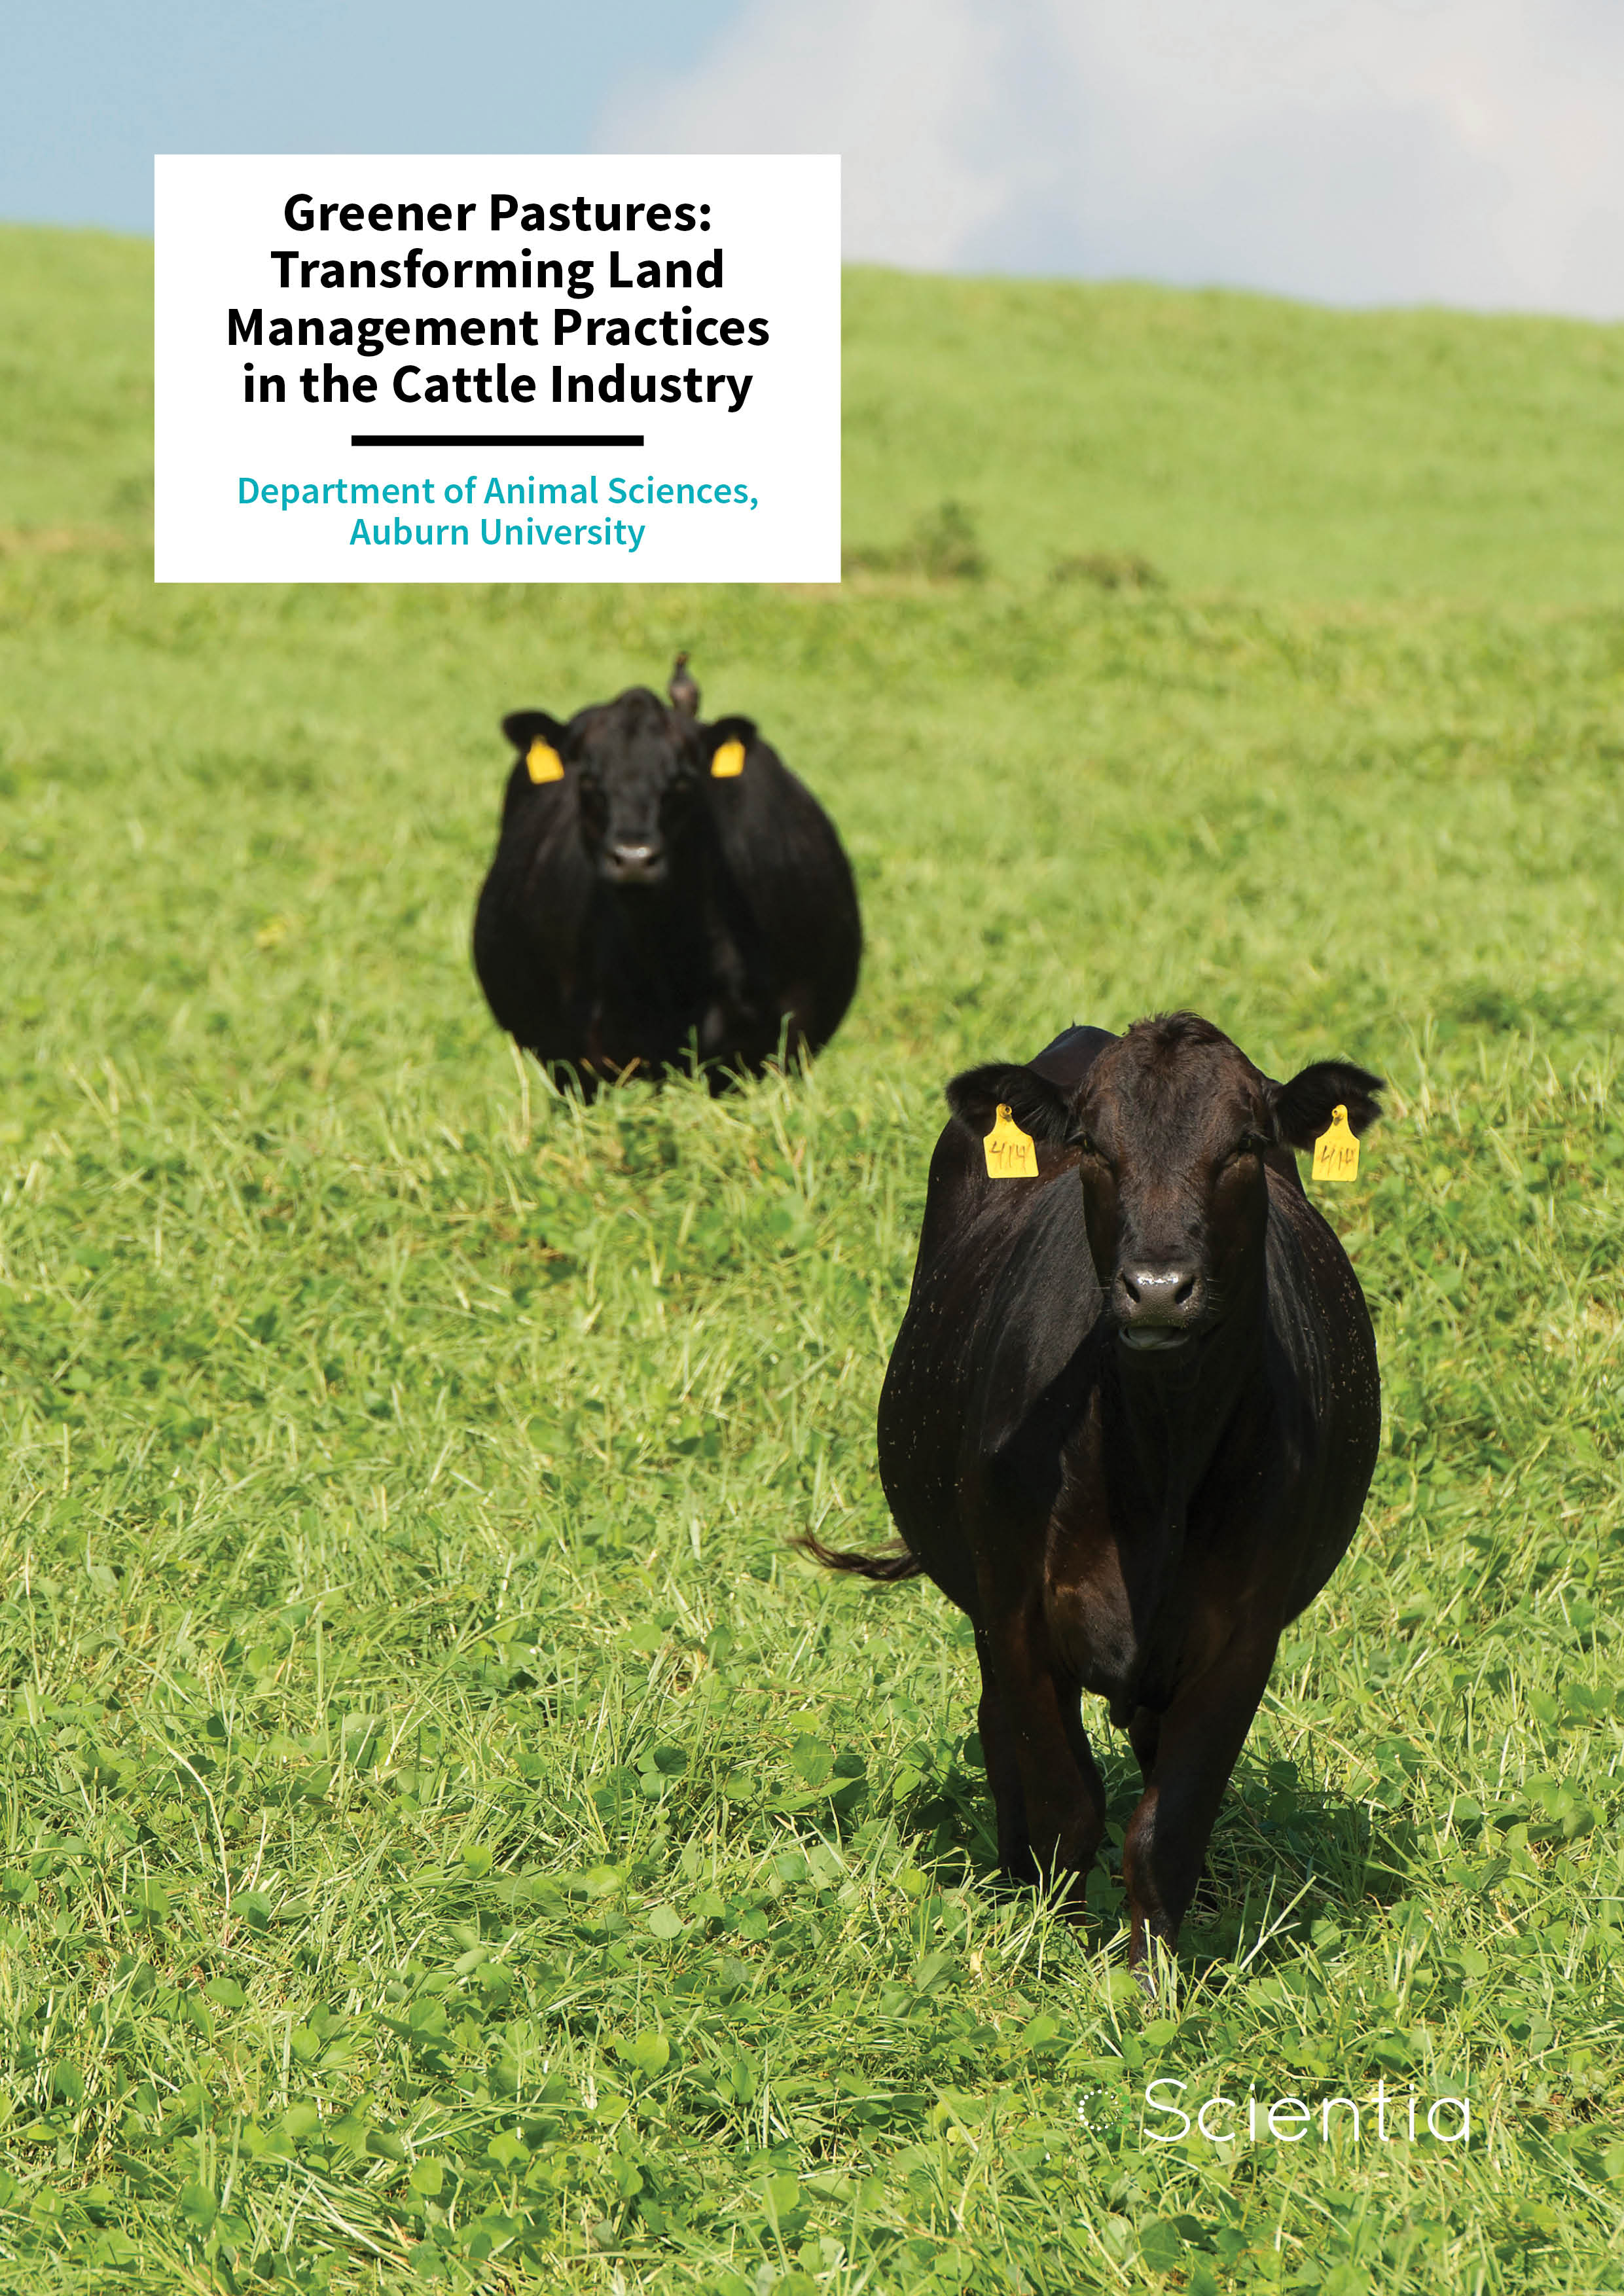 Greener Pastures: Transforming Land Management Practices in the Cattle Industry